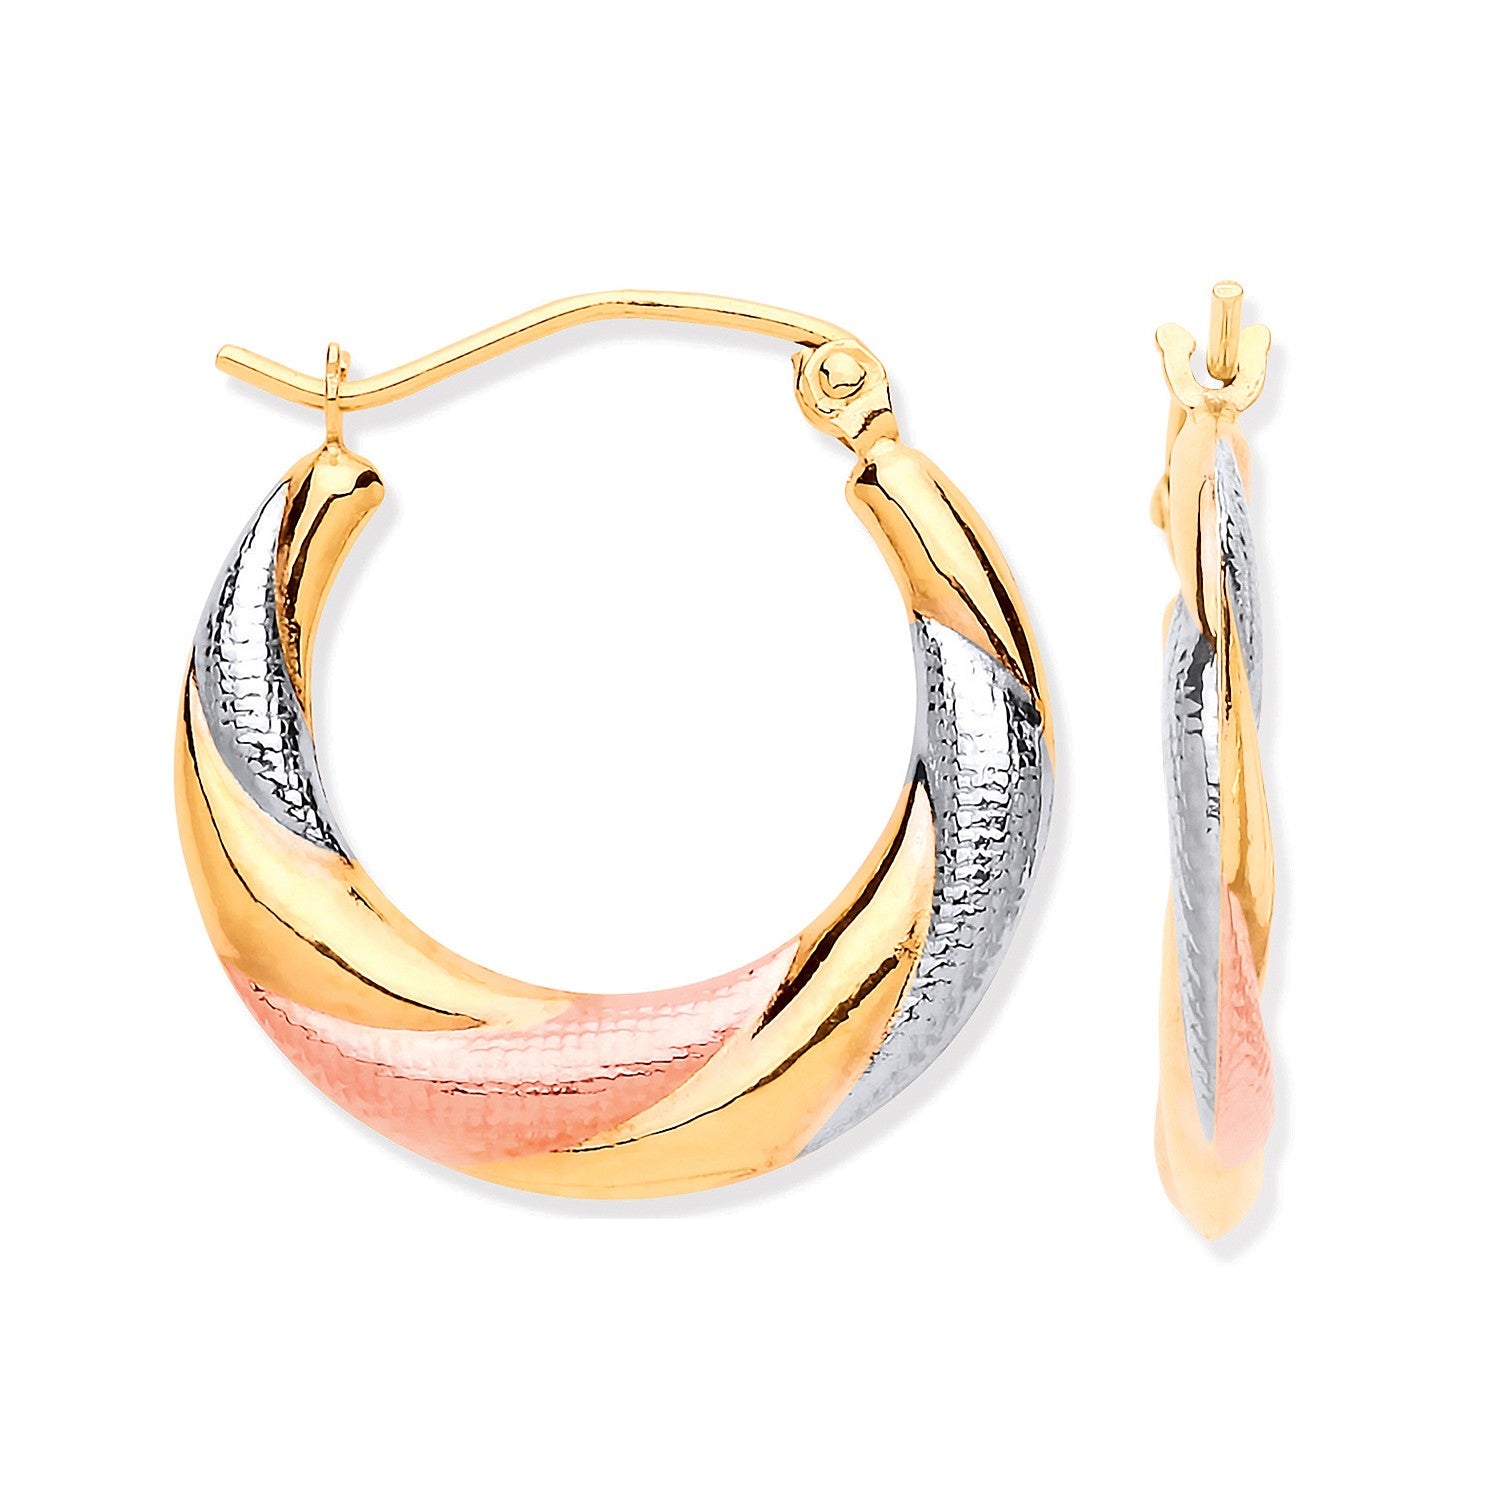 Yellow Gold, White Gold & Rose Gold Twist Hoop Earrings